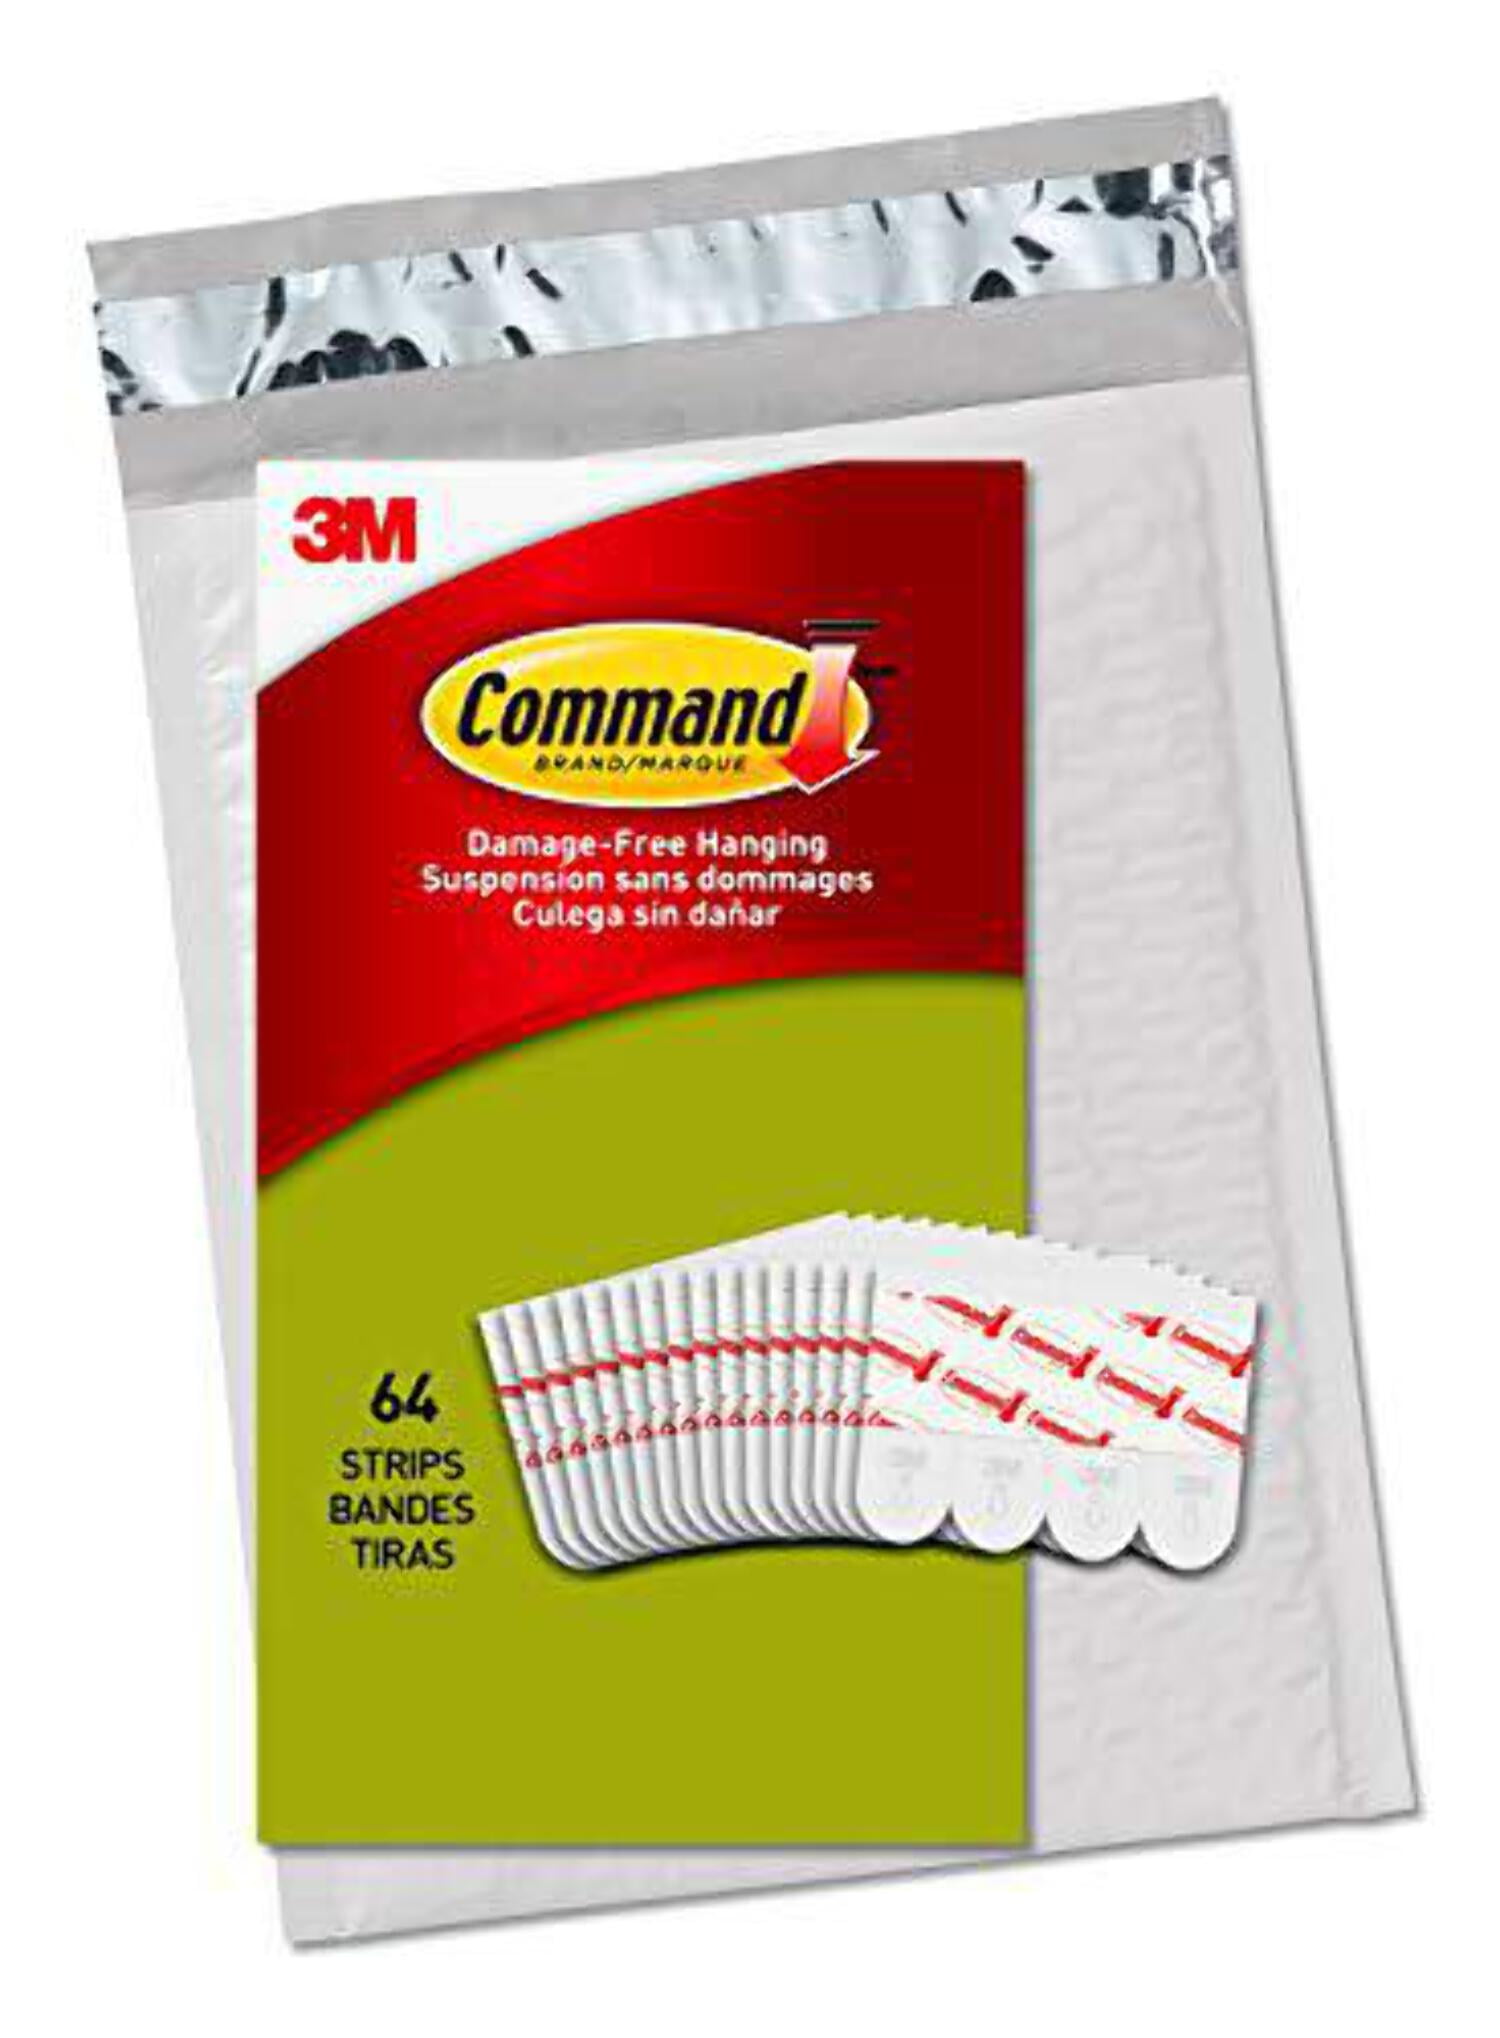 3M™ Command™ Small Poster Strips 4 Pack